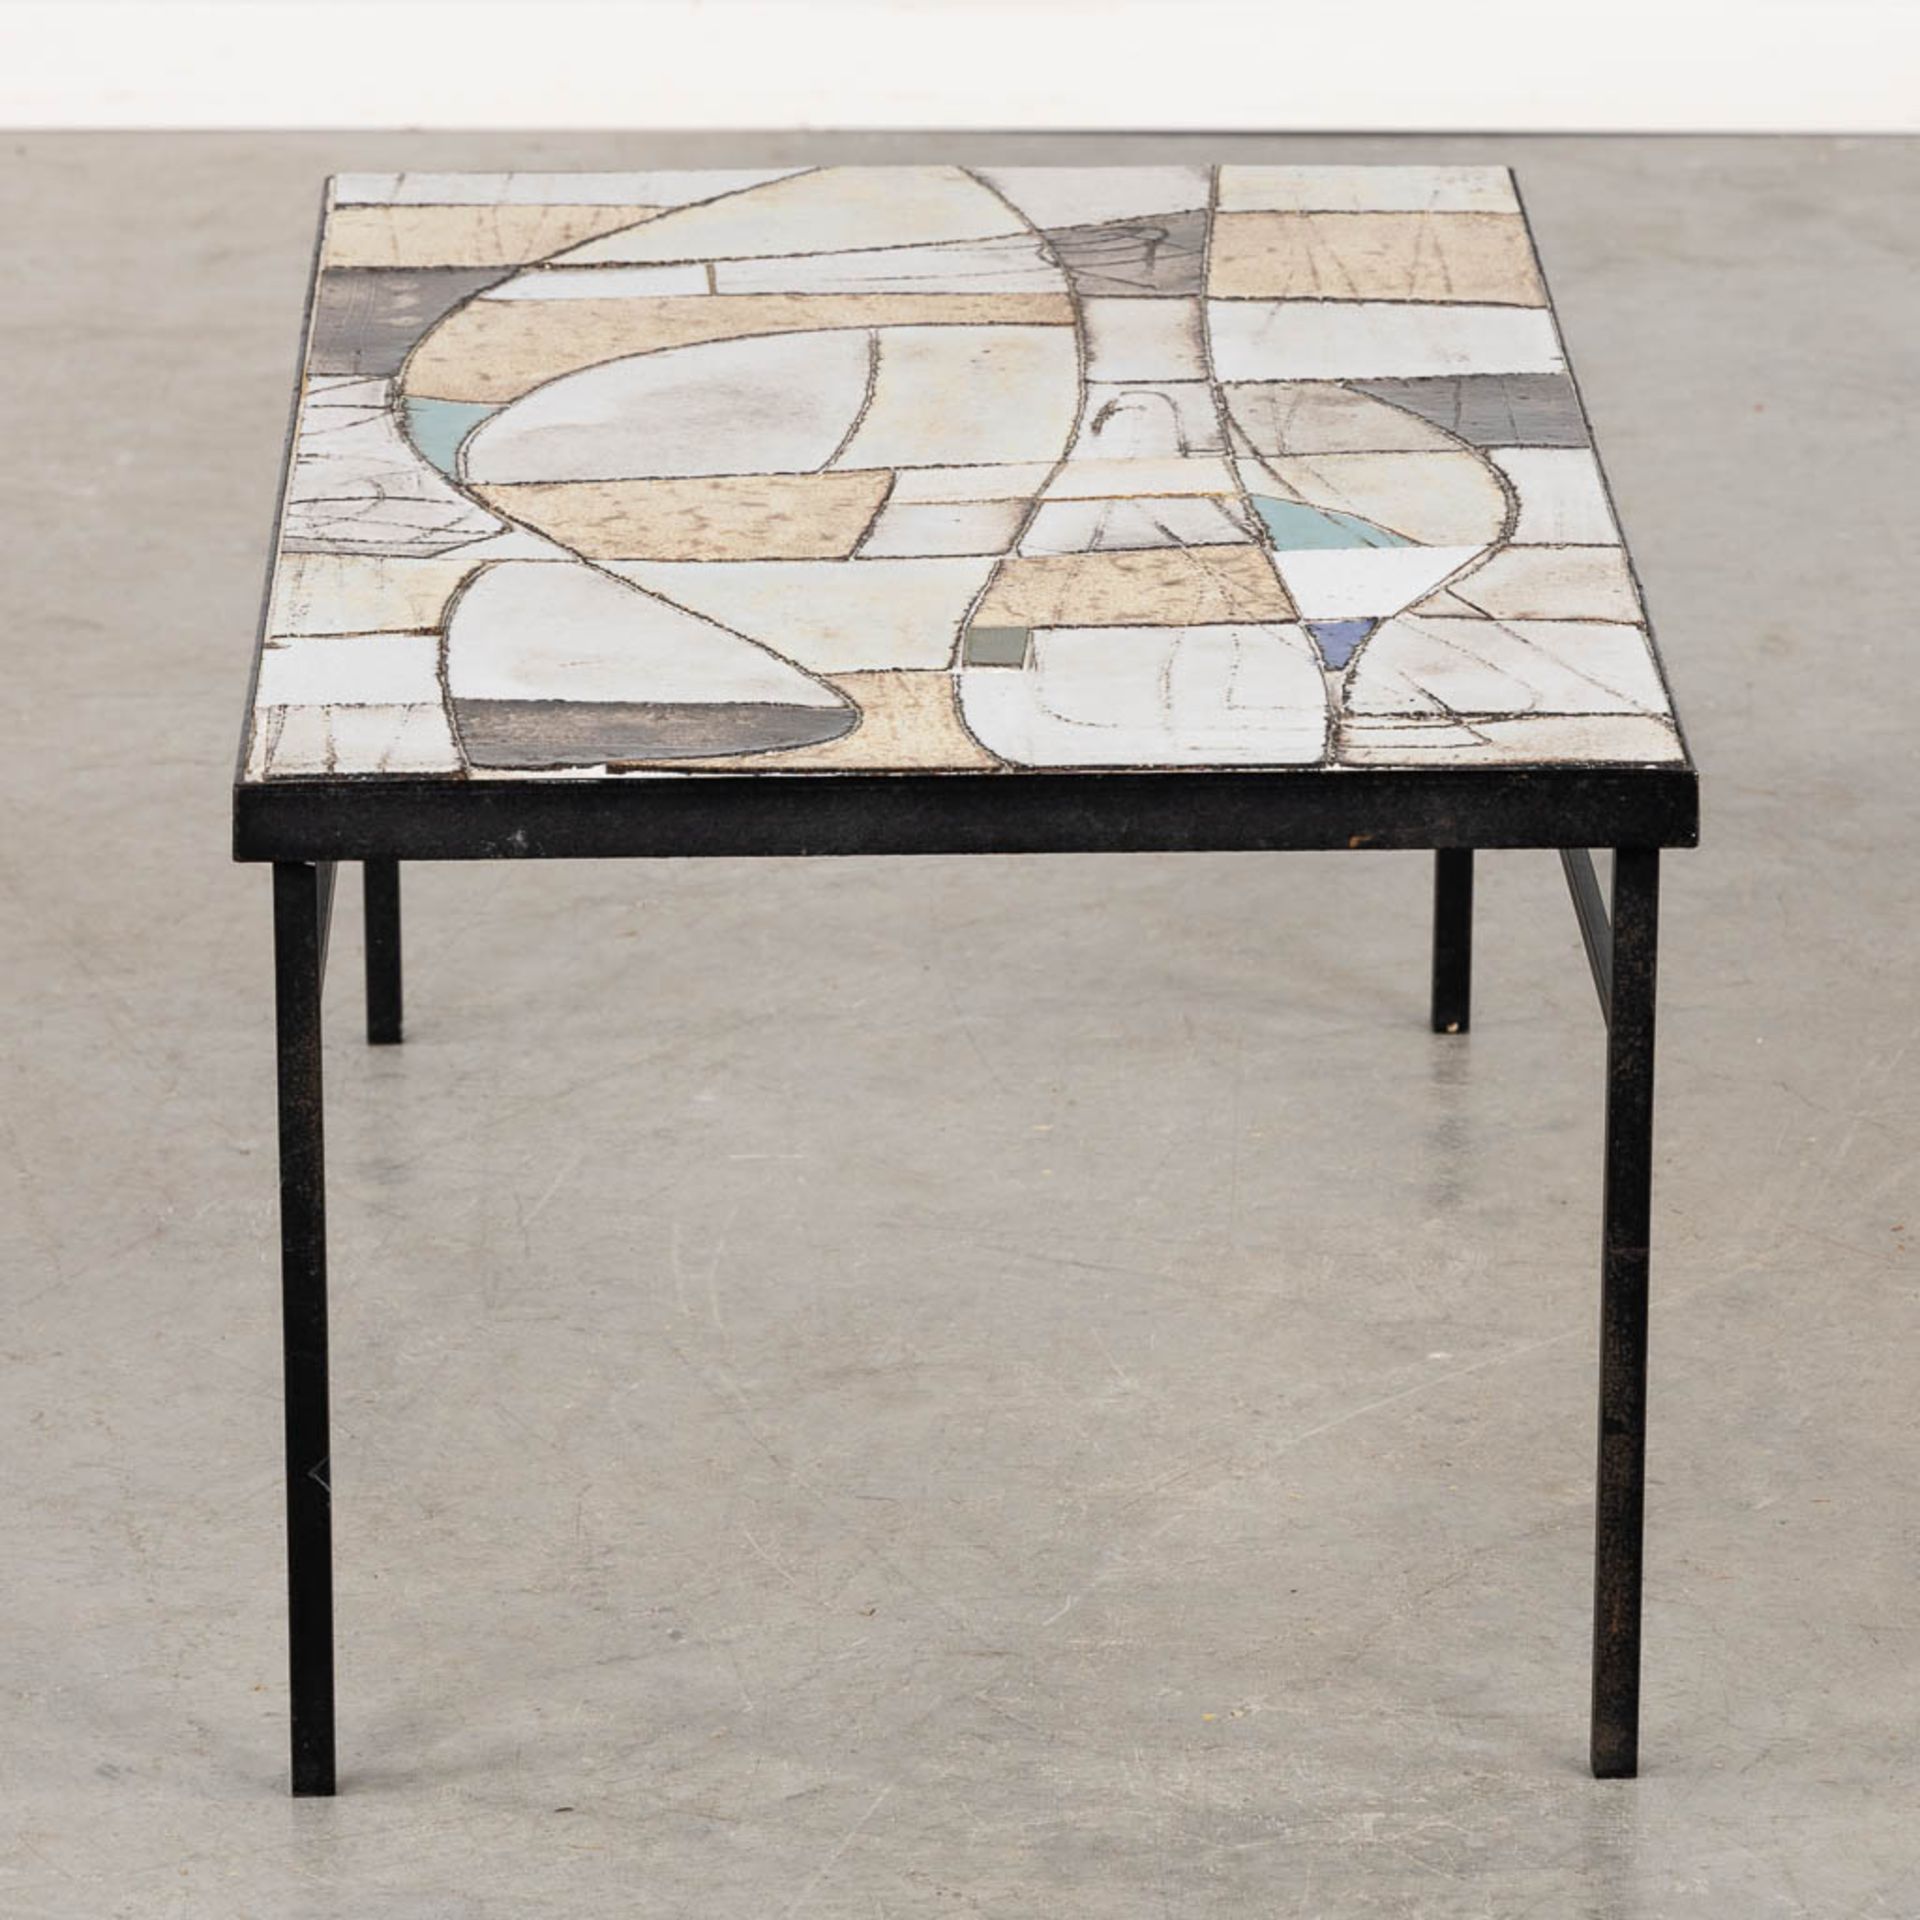 A mid-century coffee table, metal with ceramic tiles. (L:45 x W:78 x H:34 cm) - Image 6 of 11